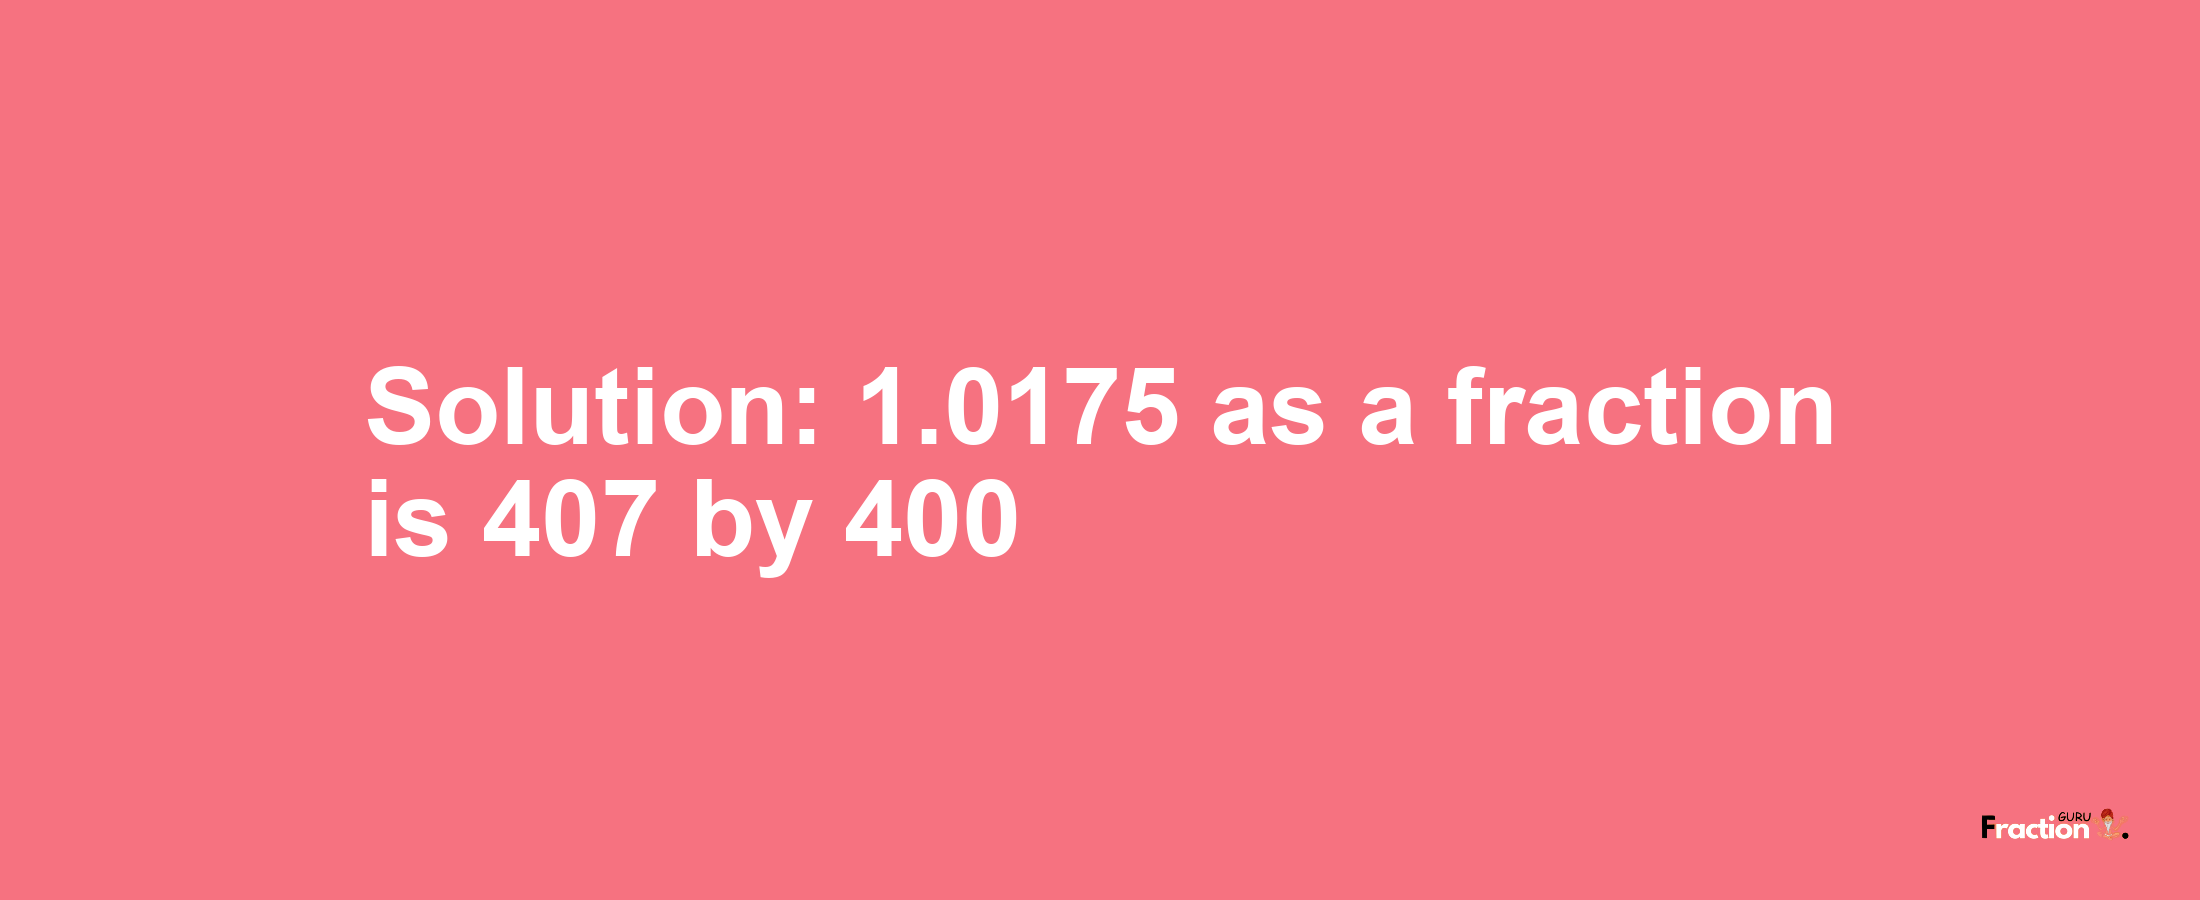 Solution:1.0175 as a fraction is 407/400